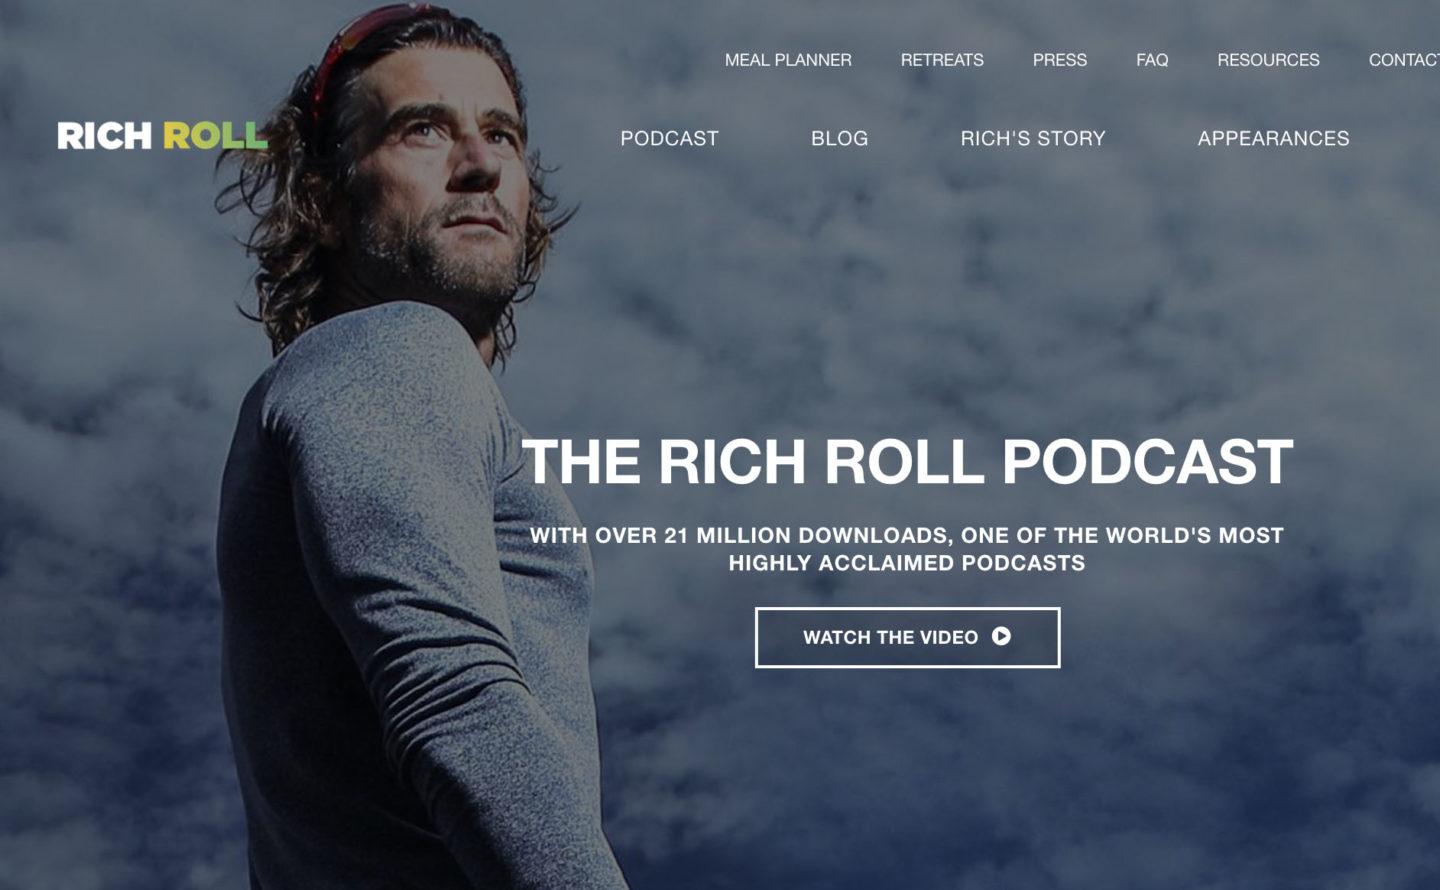 Rich Roll Podcast on Belle Meets World blog